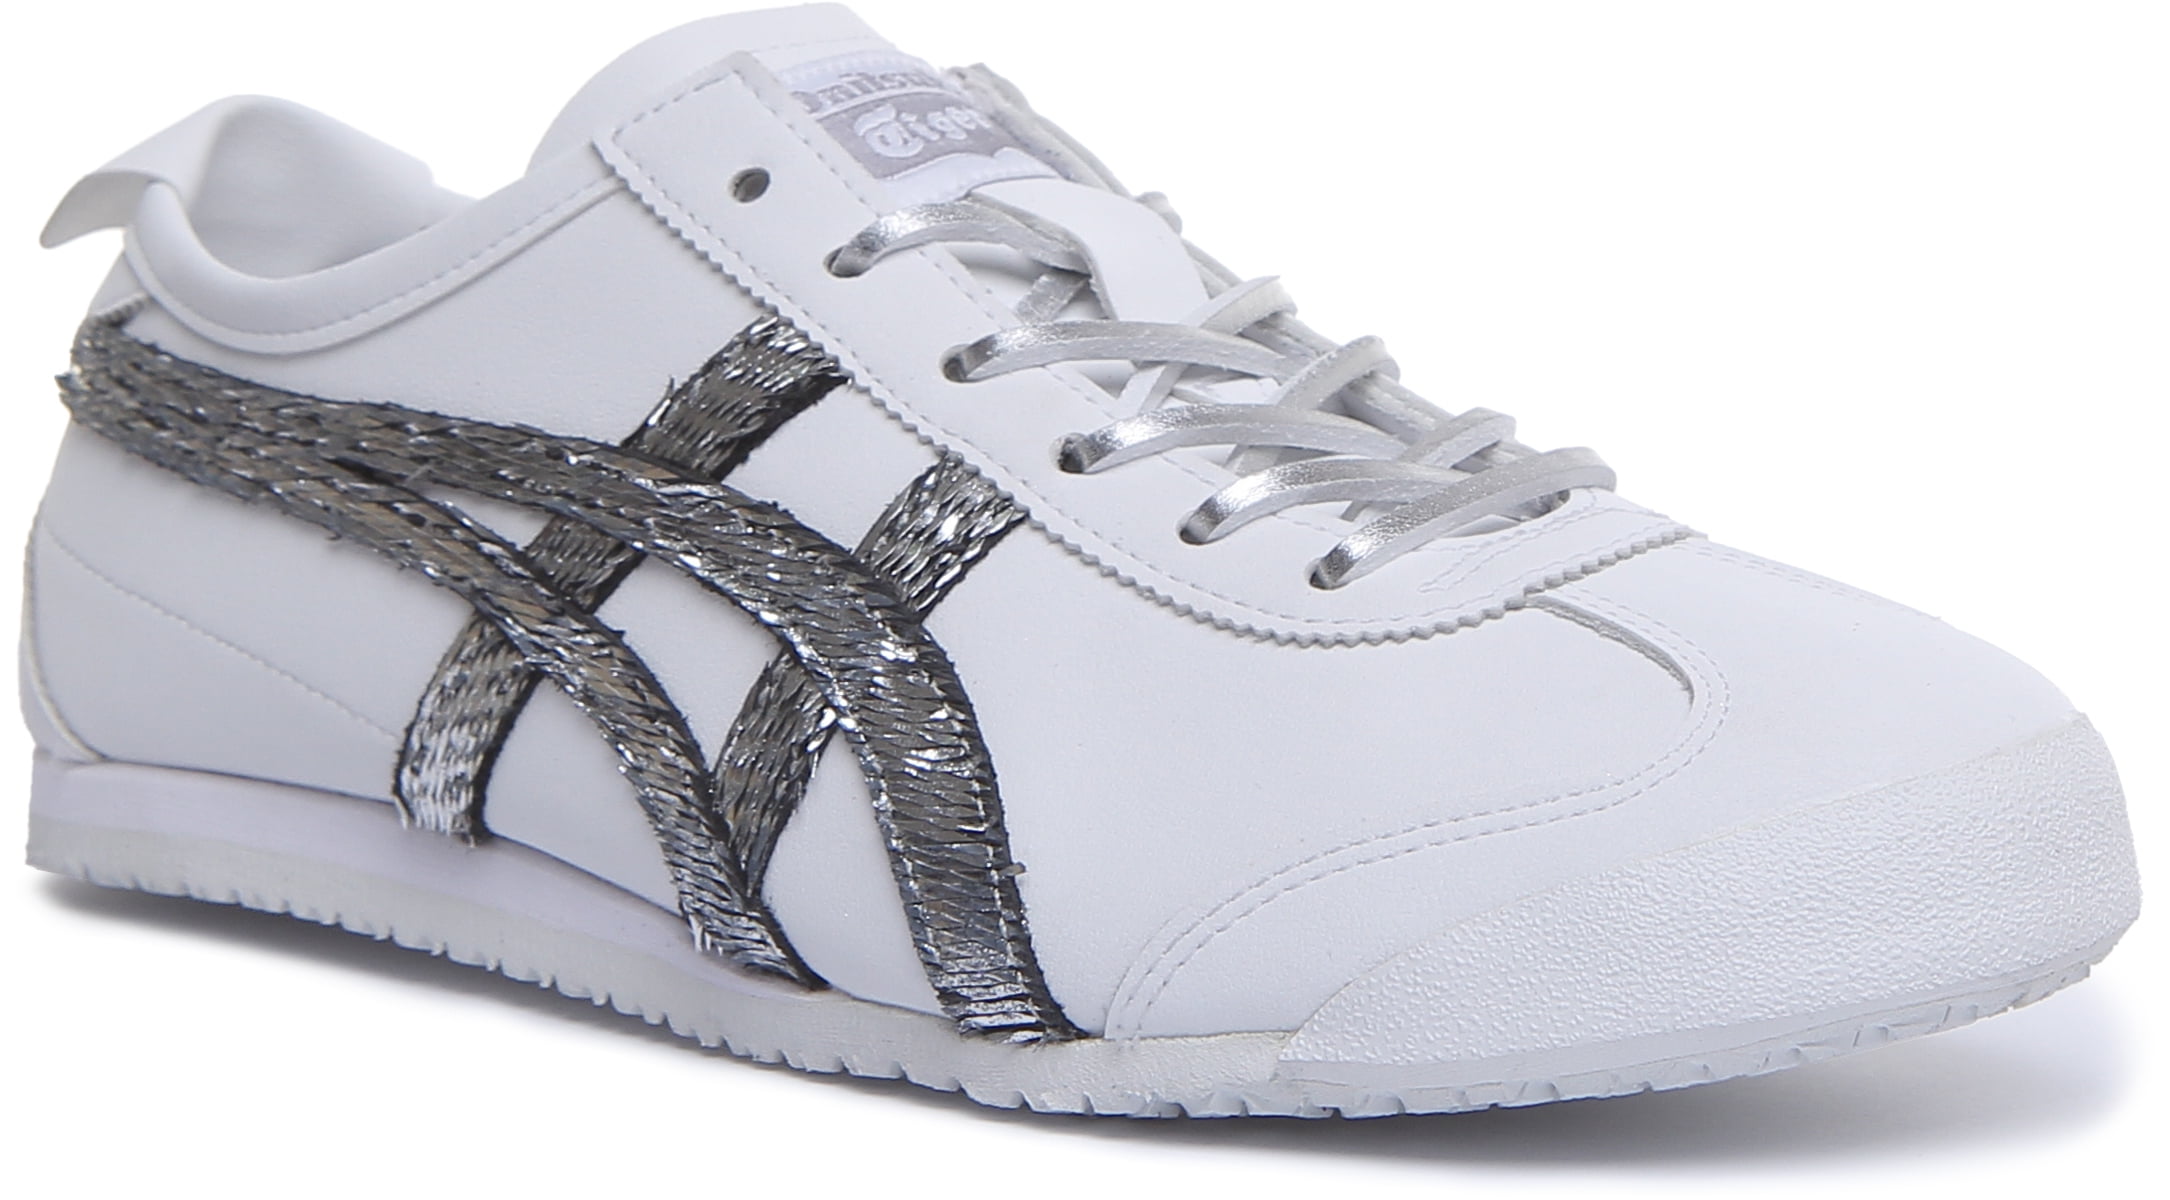 Onitsuka Tiger Mexico 66 Women's Leather Lace Up Casual Sneakers